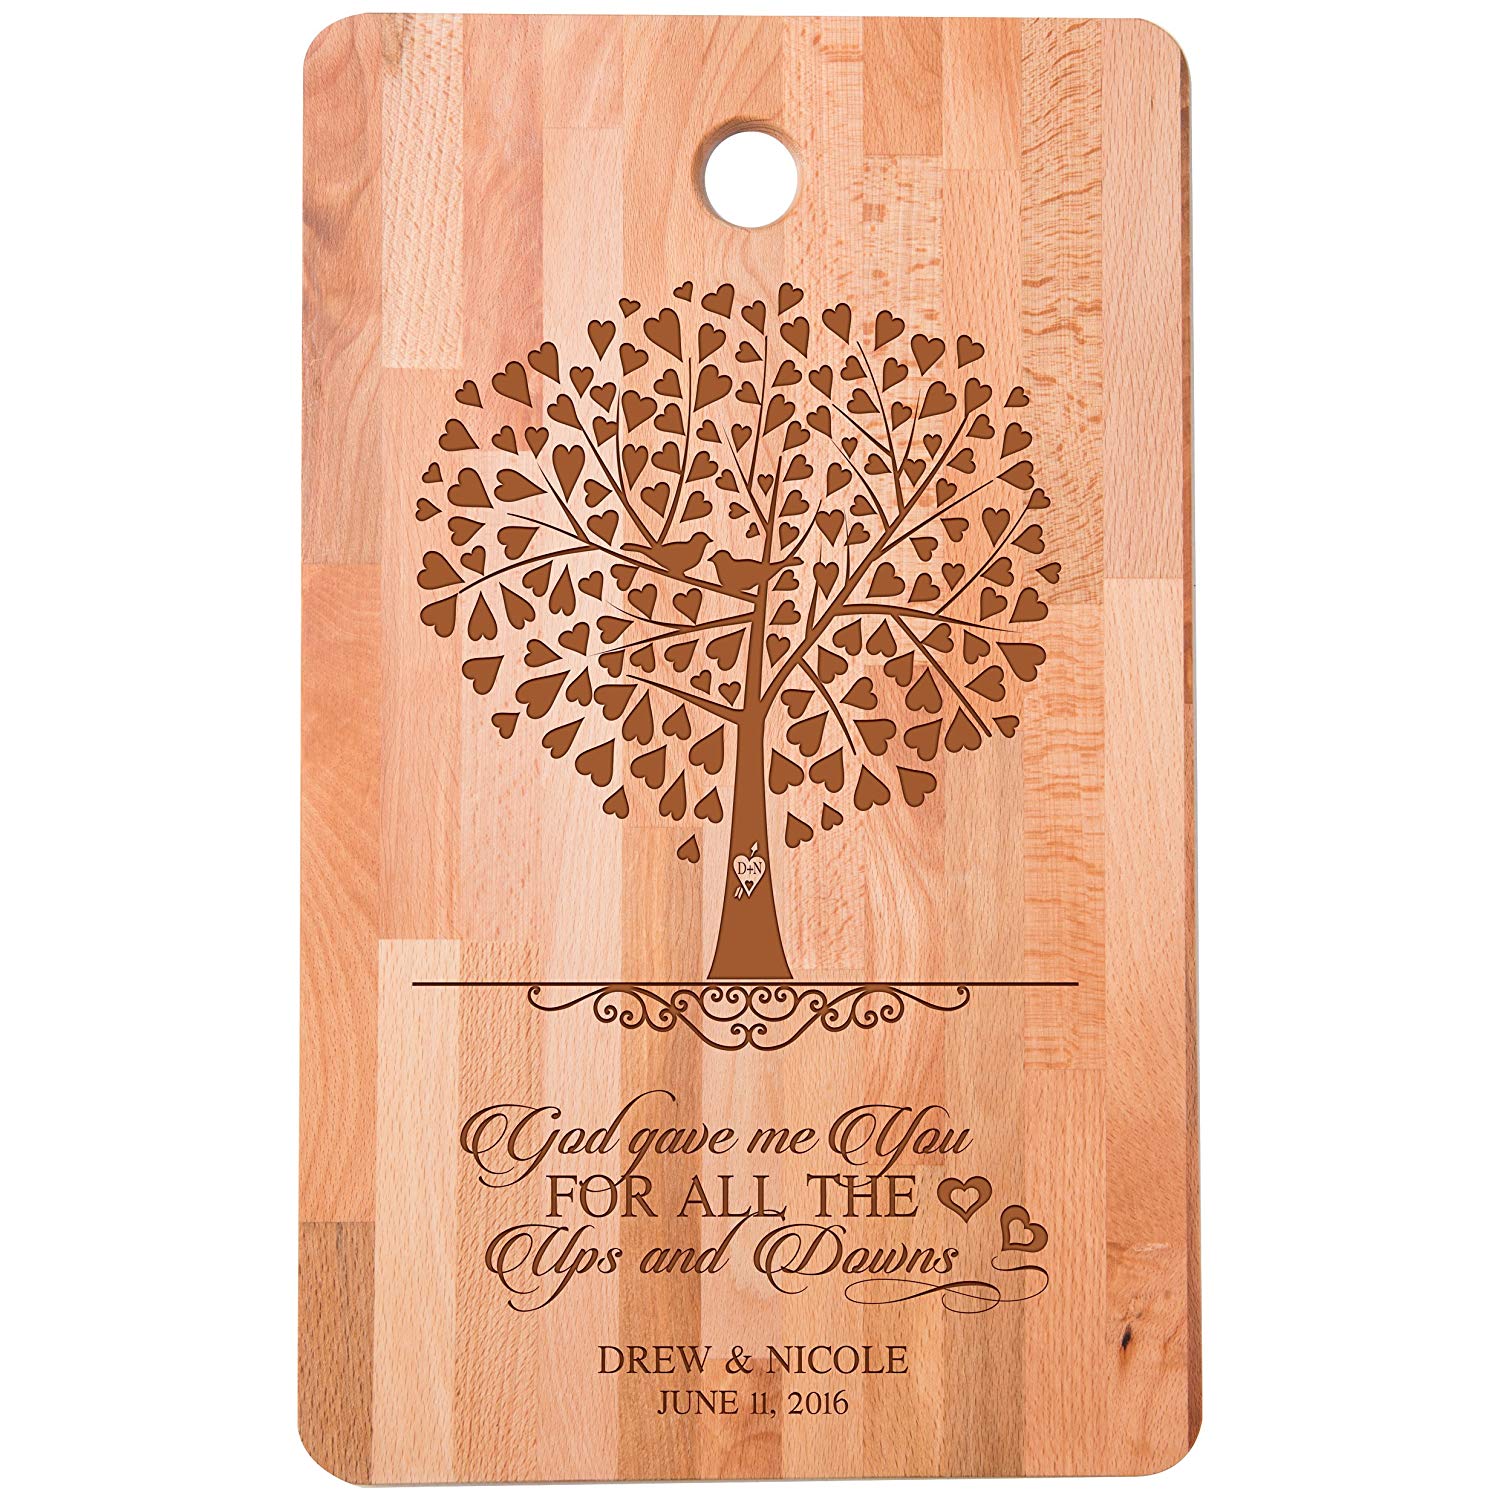 Personalized bamboo Wedding Cutting Board Gift - God Gave Me You - LifeSong Milestones